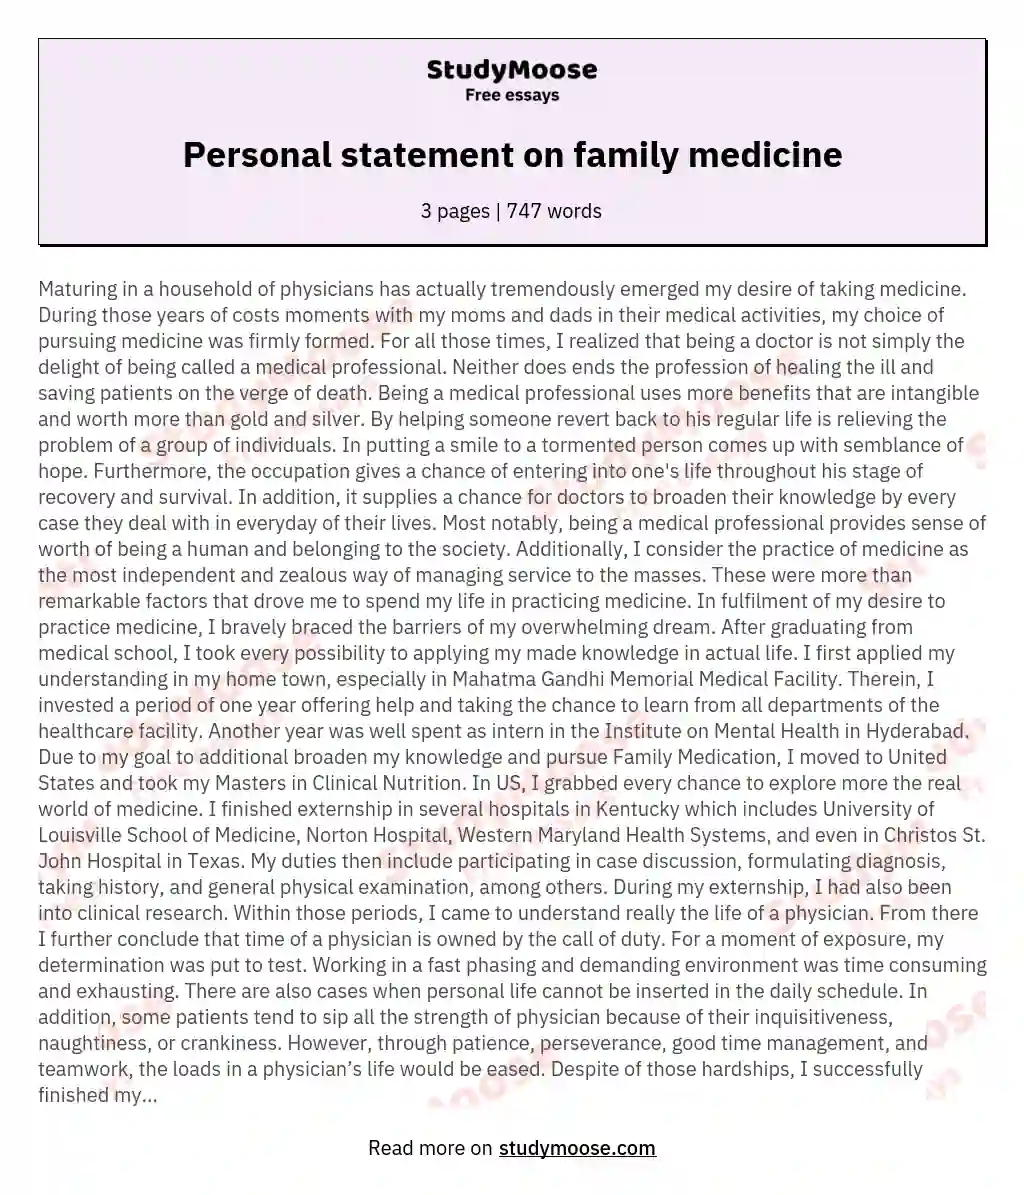 Personal statement on family medicine essay